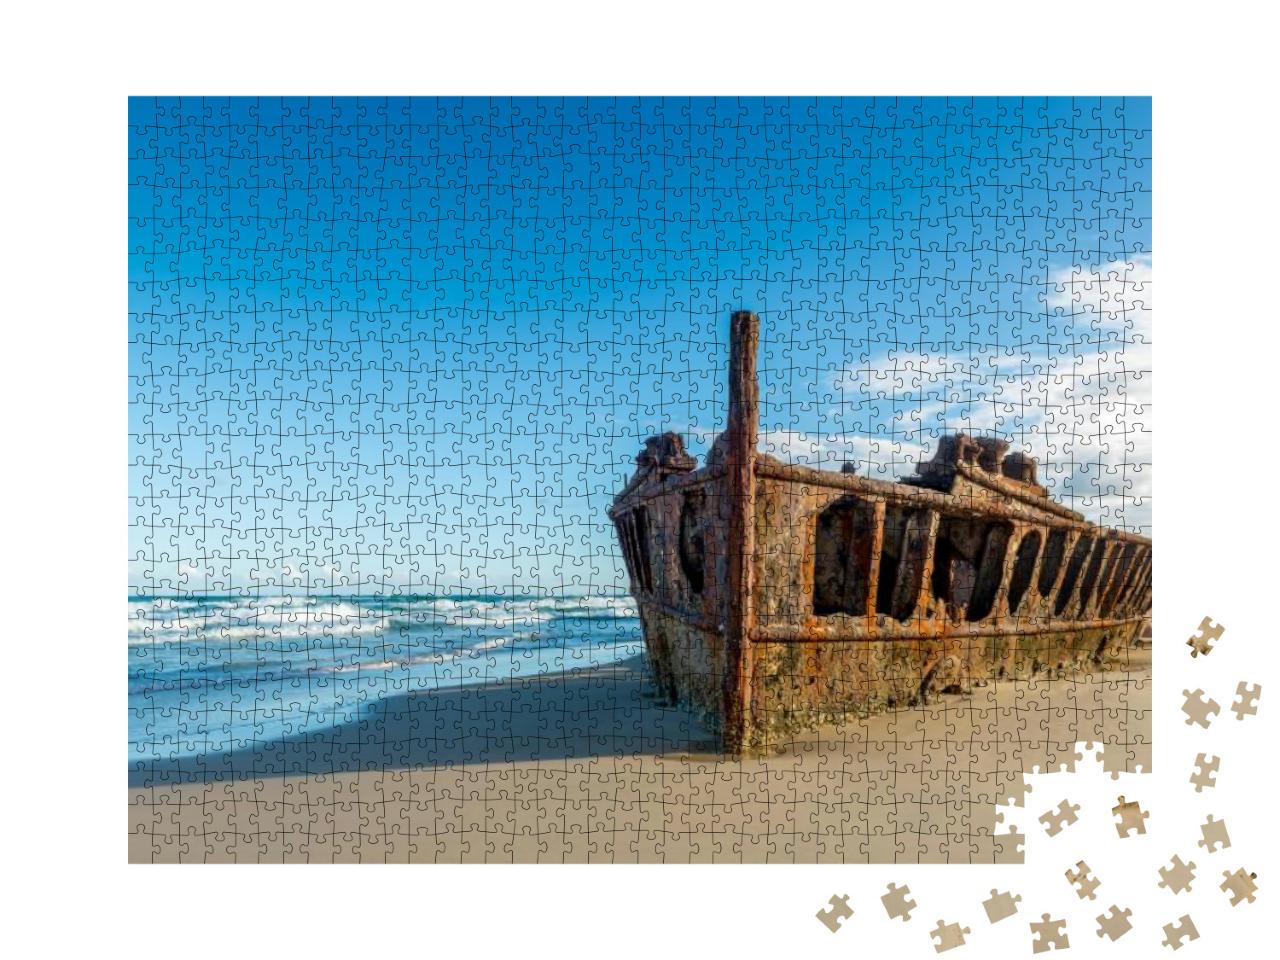 Historic Ss Maheno Wreck, Fraser Island - Australia... Jigsaw Puzzle with 1000 pieces